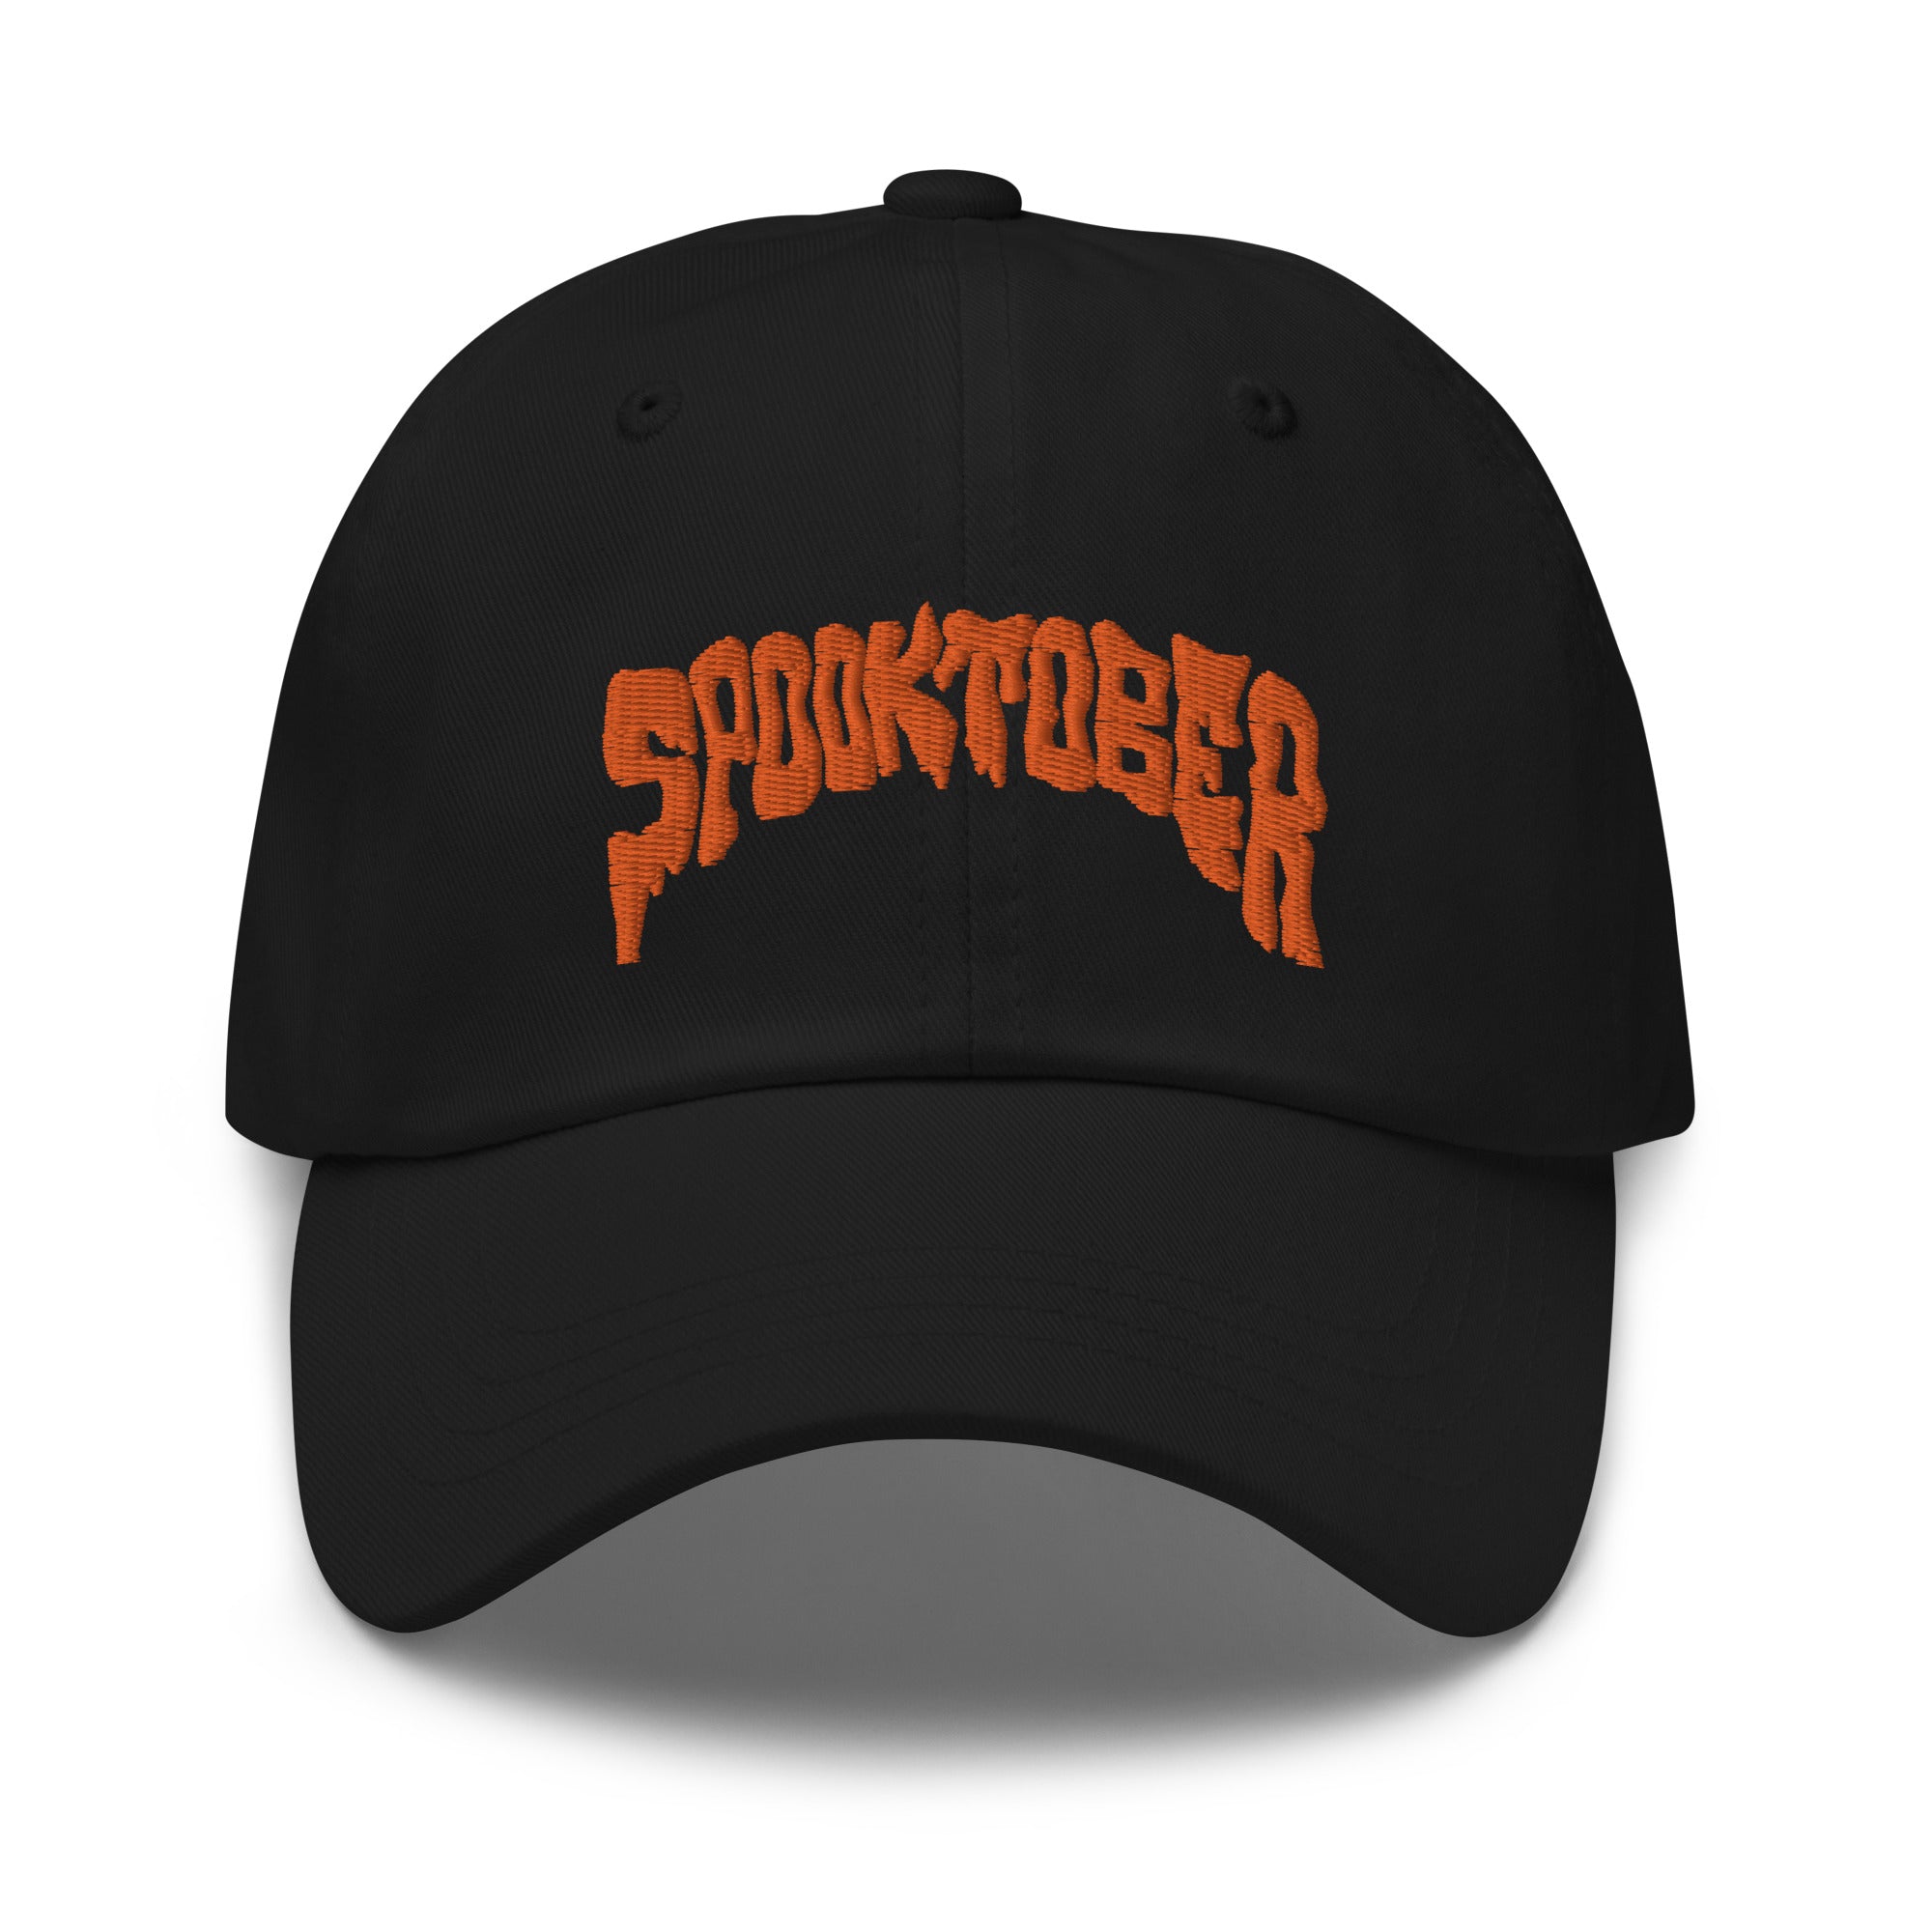 Spooktober Dad Hat-Hats-Bussin With The Boys-Barstool Sports